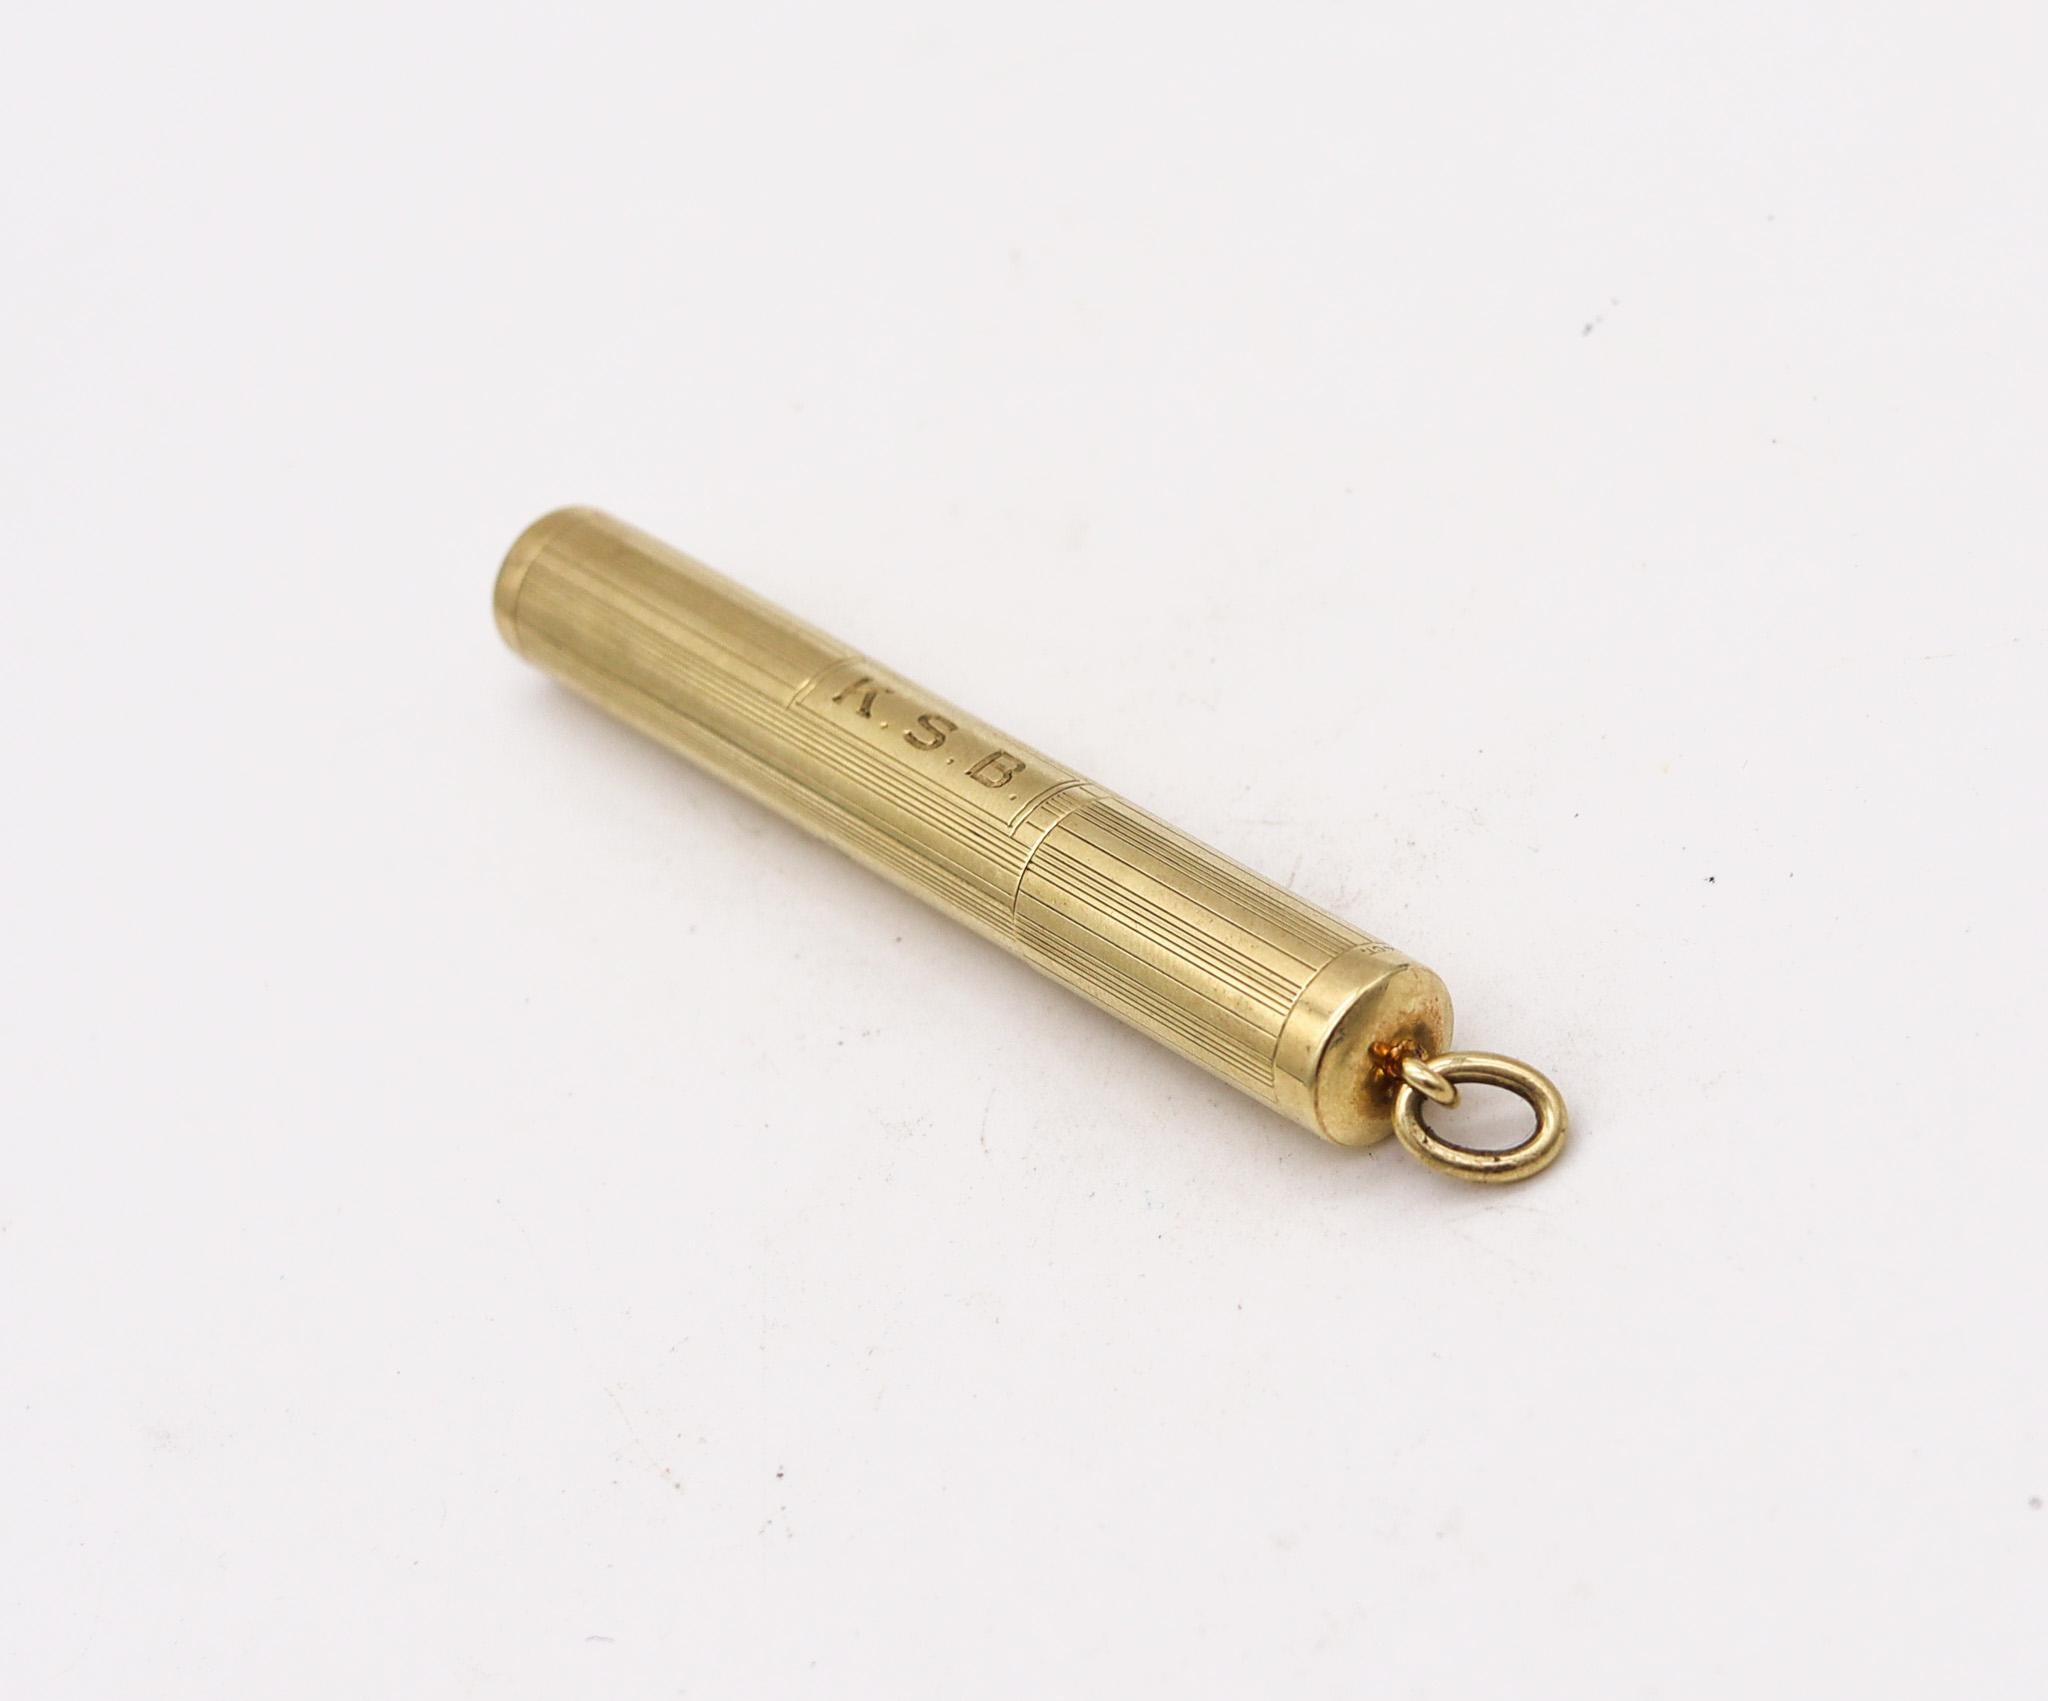 Petrol lighter pendant designed by Cartier.

An elegant petrol lighter pendant, created by the house of Cartier, back in the 1940. It was crafted in a cylindrical shape during the art deco period in solid yellow gold of 18 karats with incised 